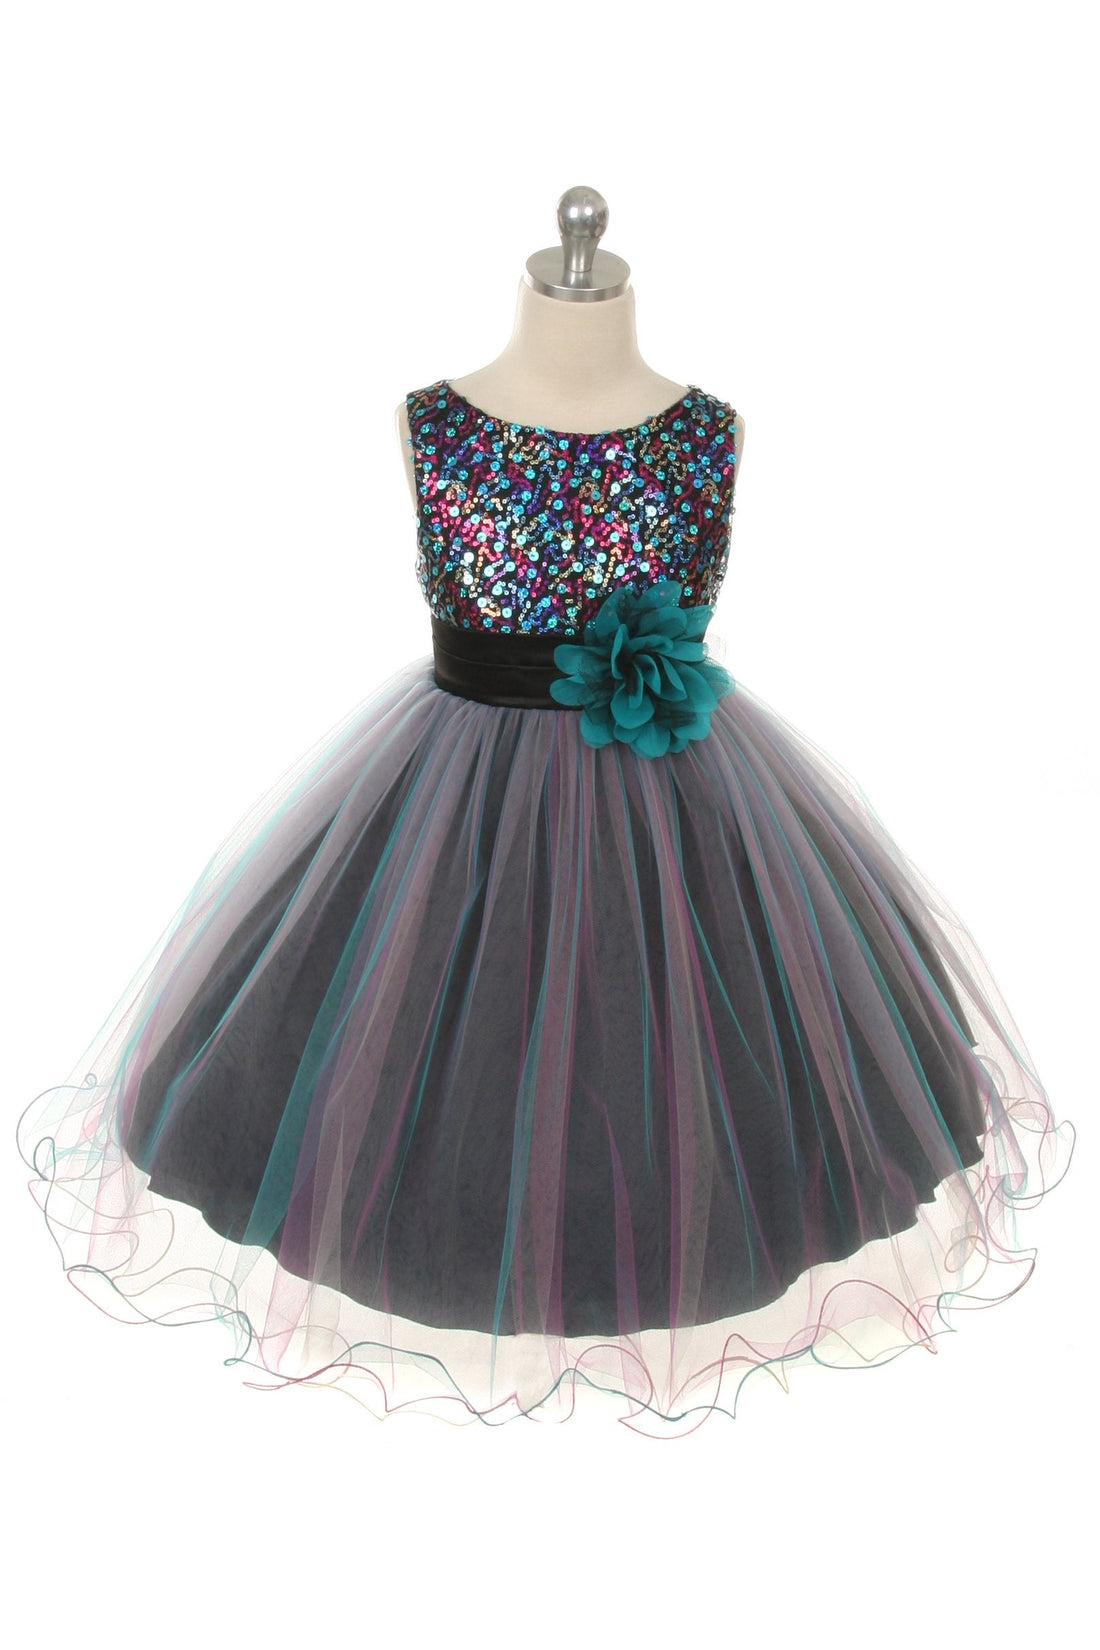 Multi-Sequin Trio Color Tulle Girl Party Dress by AS327 Kids Dream - Girl Formal Dresses